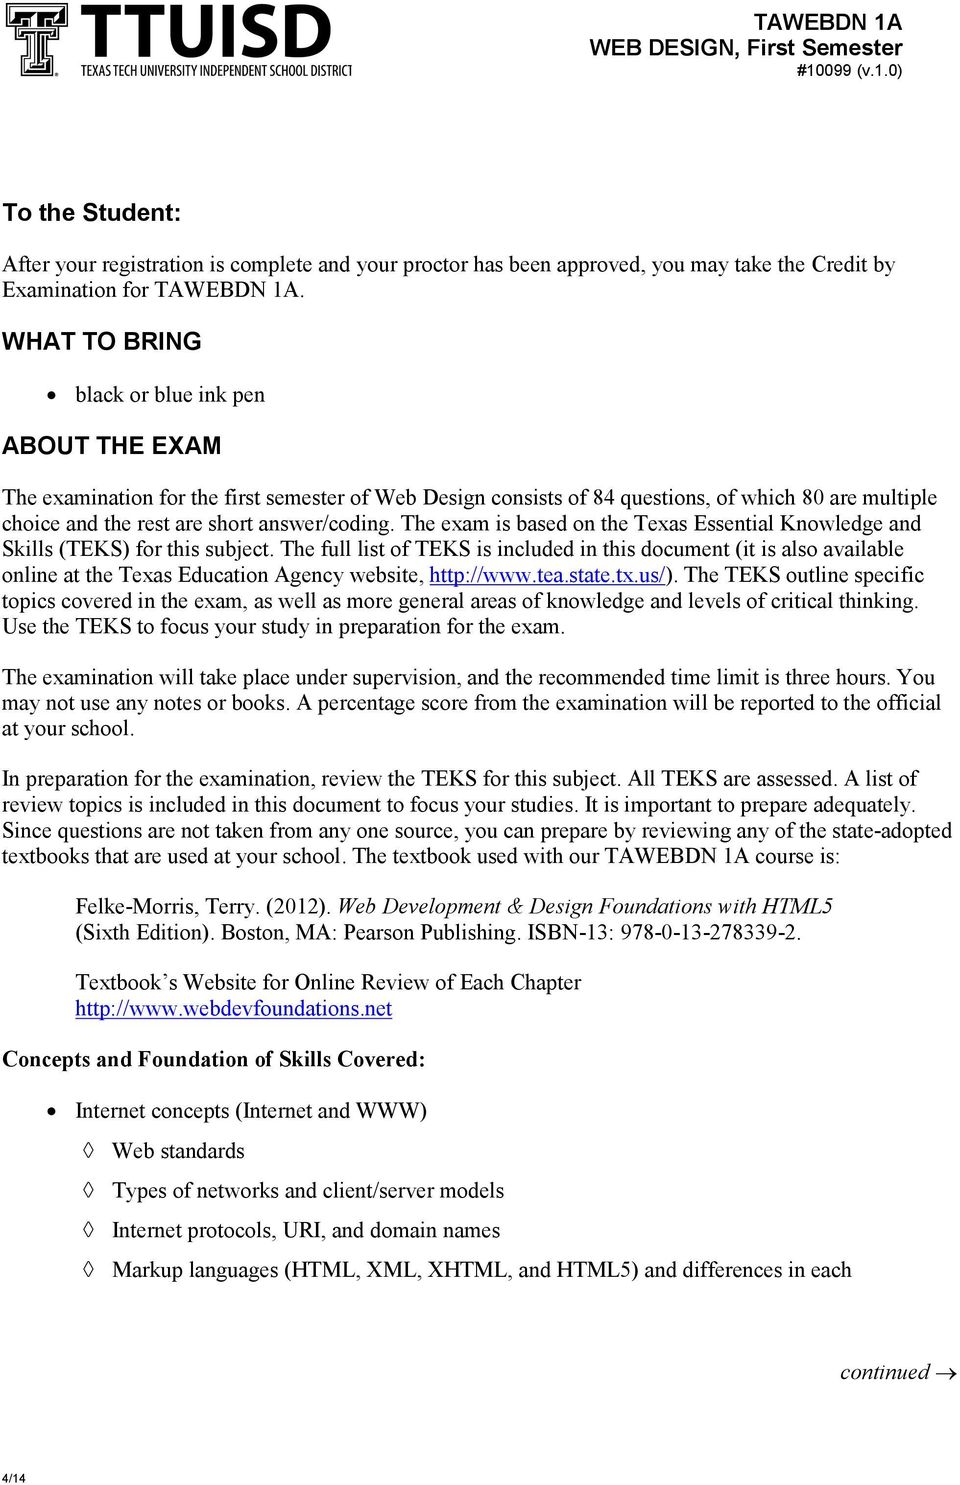 The exam is based on the Texas Essential Knowledge and Skills (TEKS) for this subject.